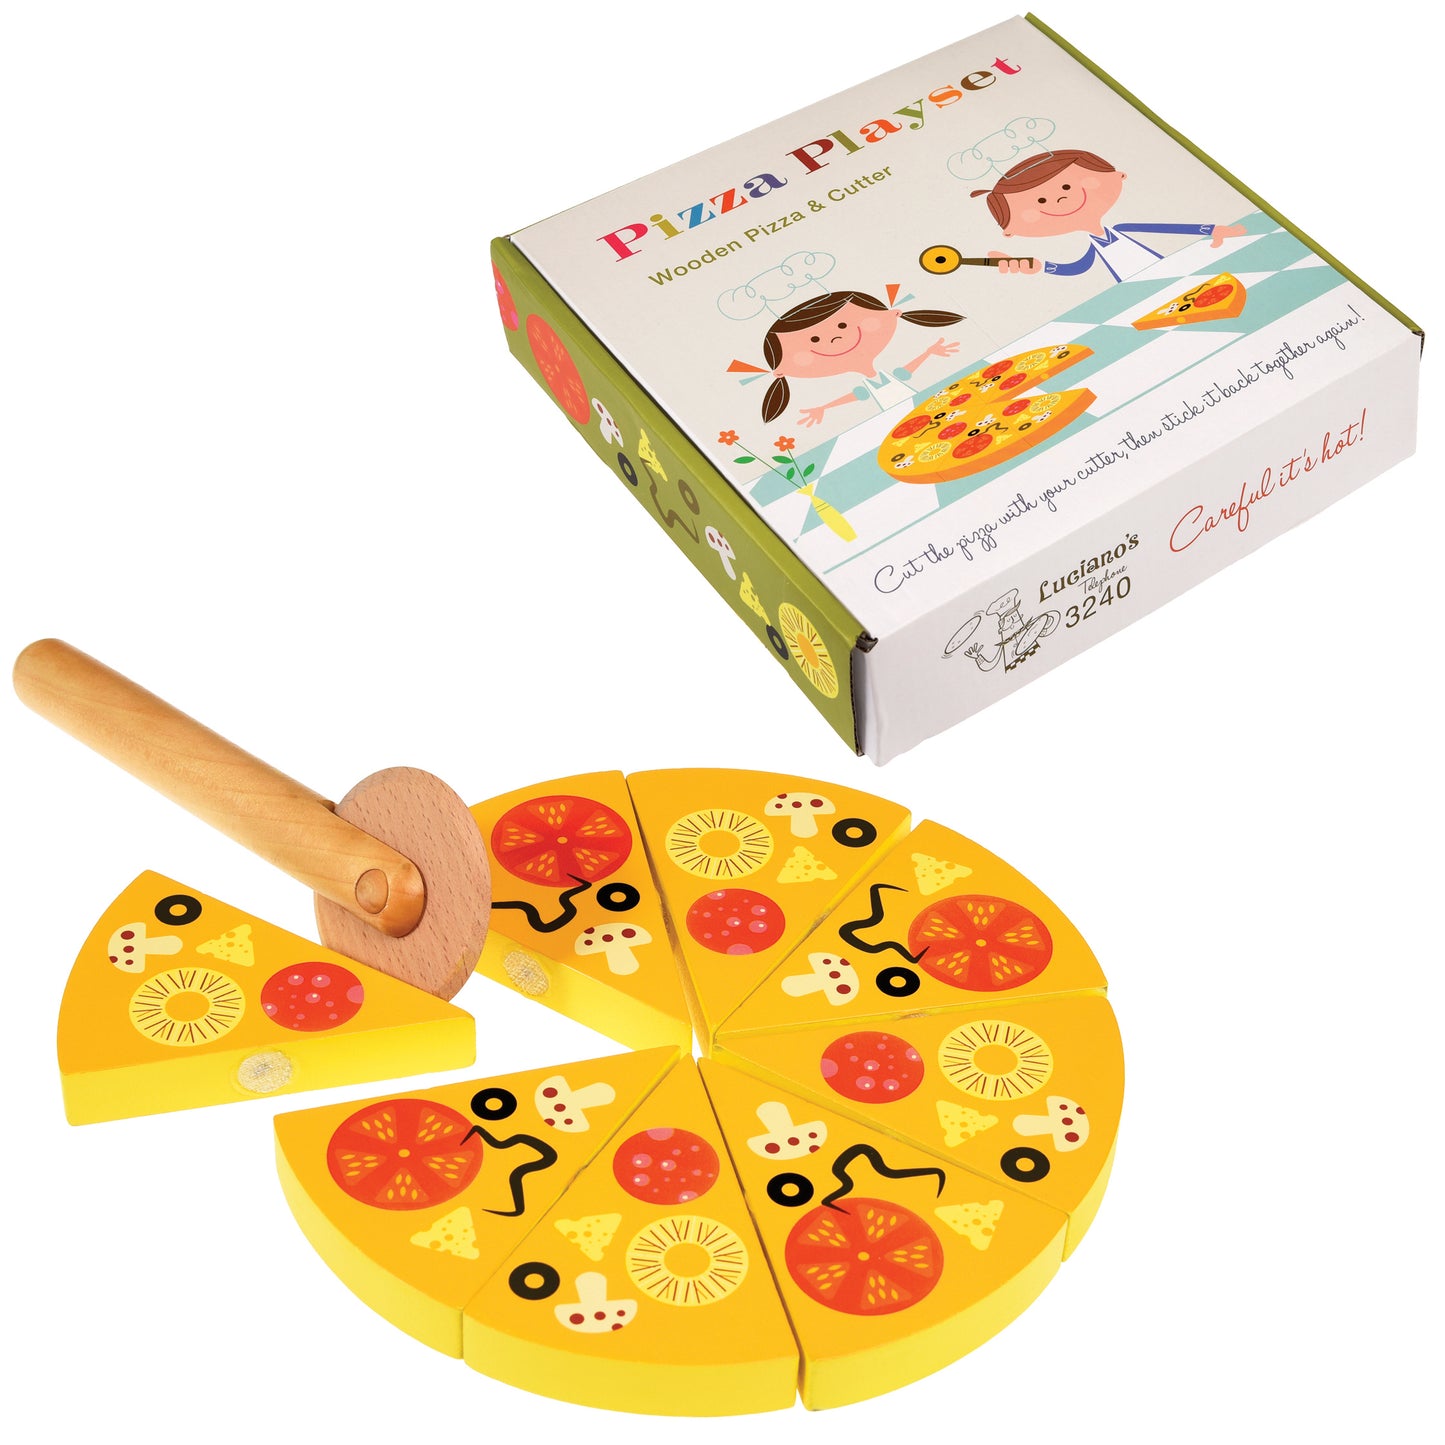 Wooden Toy Pizza in a Box